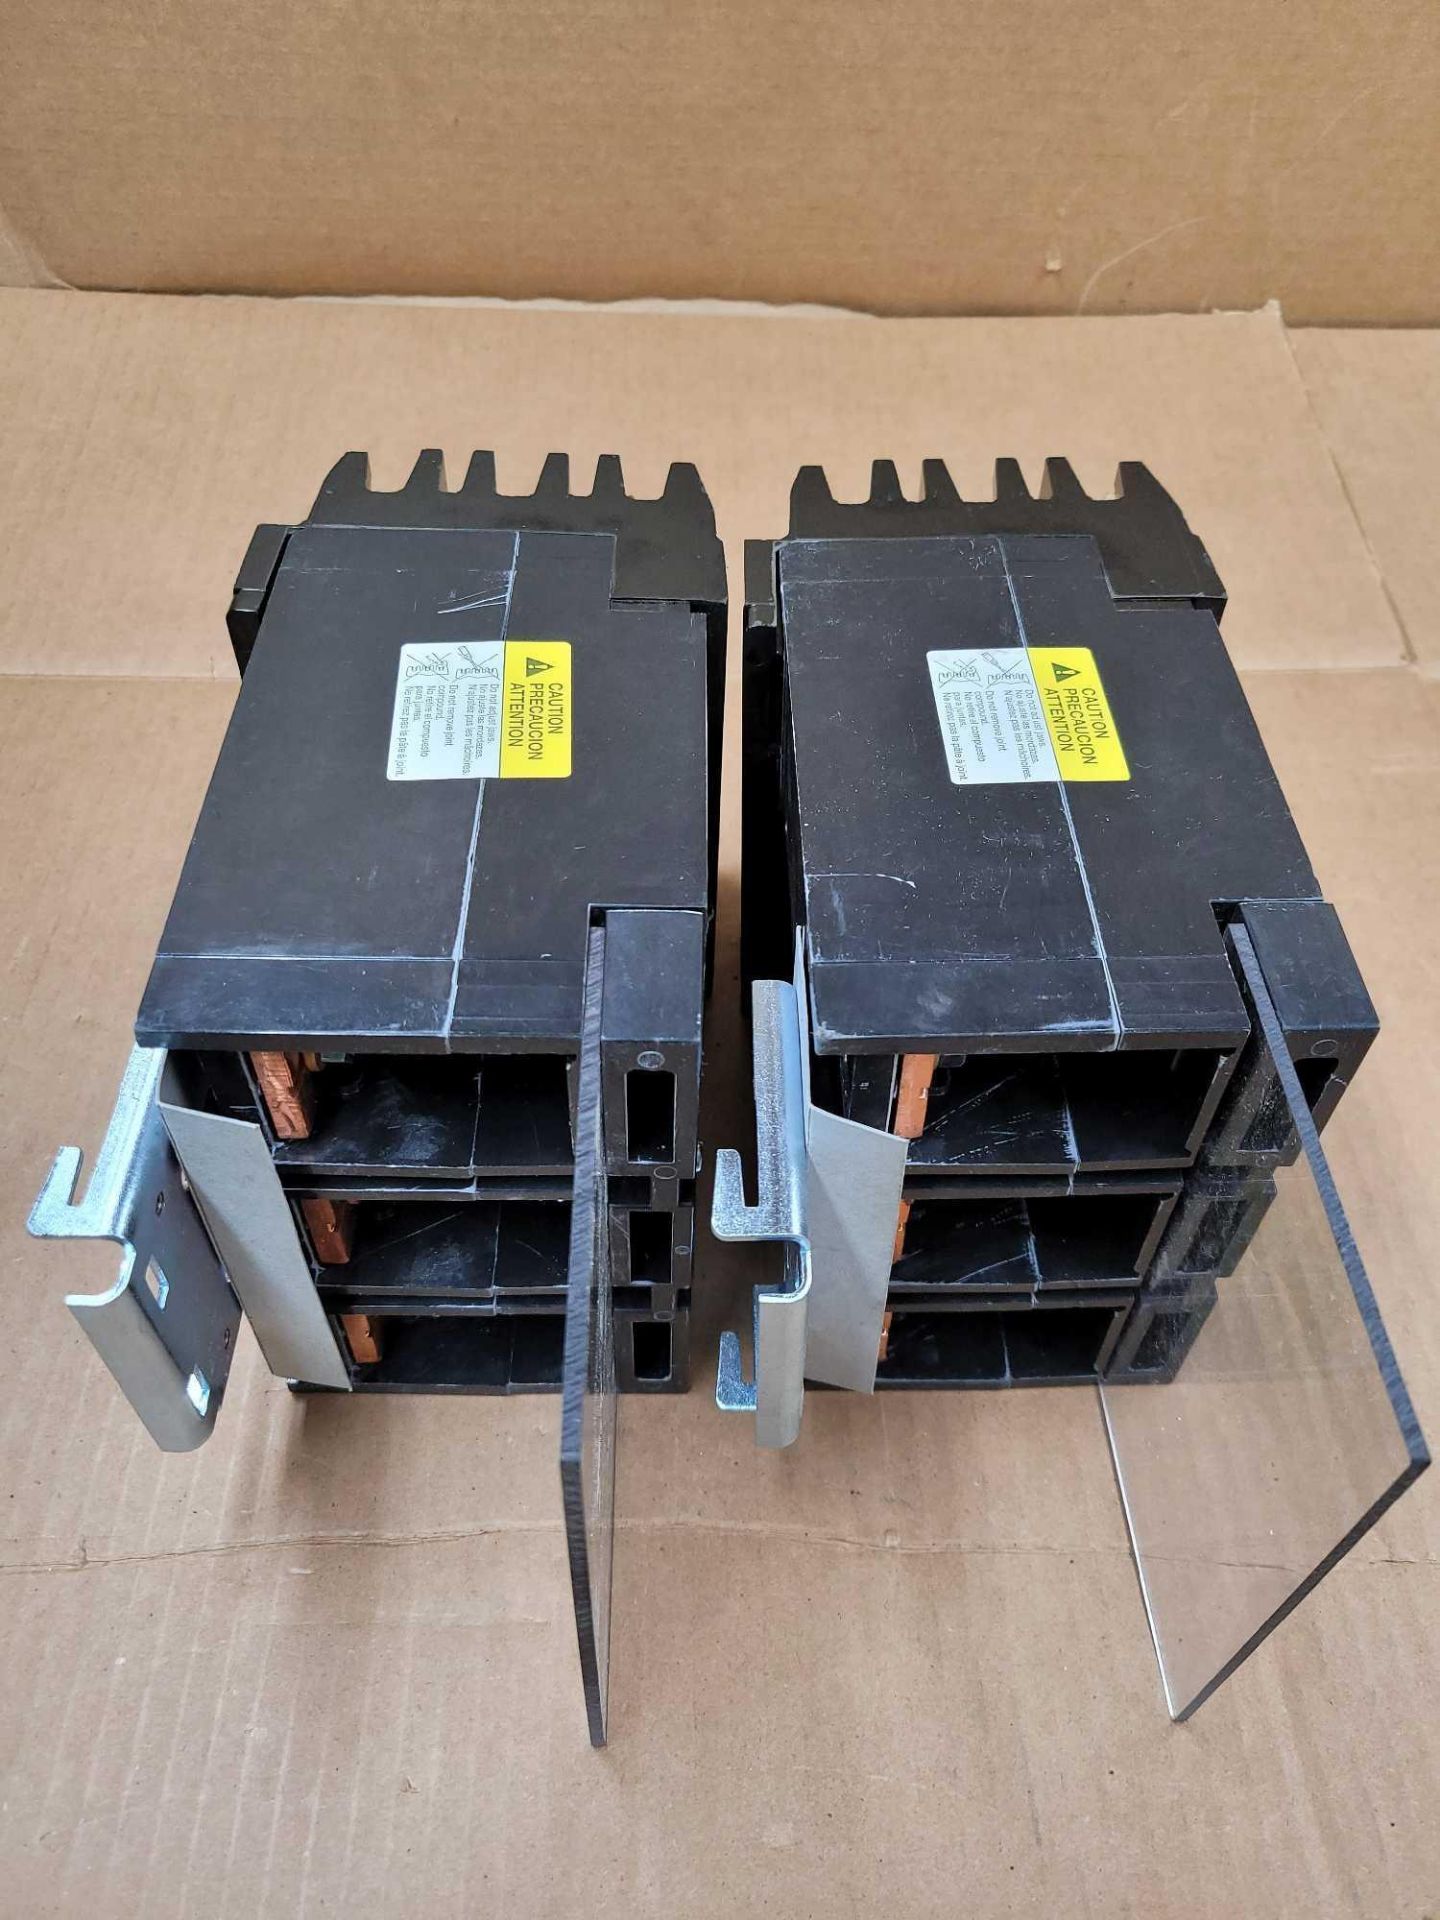 LOT OF 2 SQUARE D SL400A / 400 Amp 3 Pole Circuit Breaker  /  Lot Weight: 16.8 lbs - Image 3 of 5